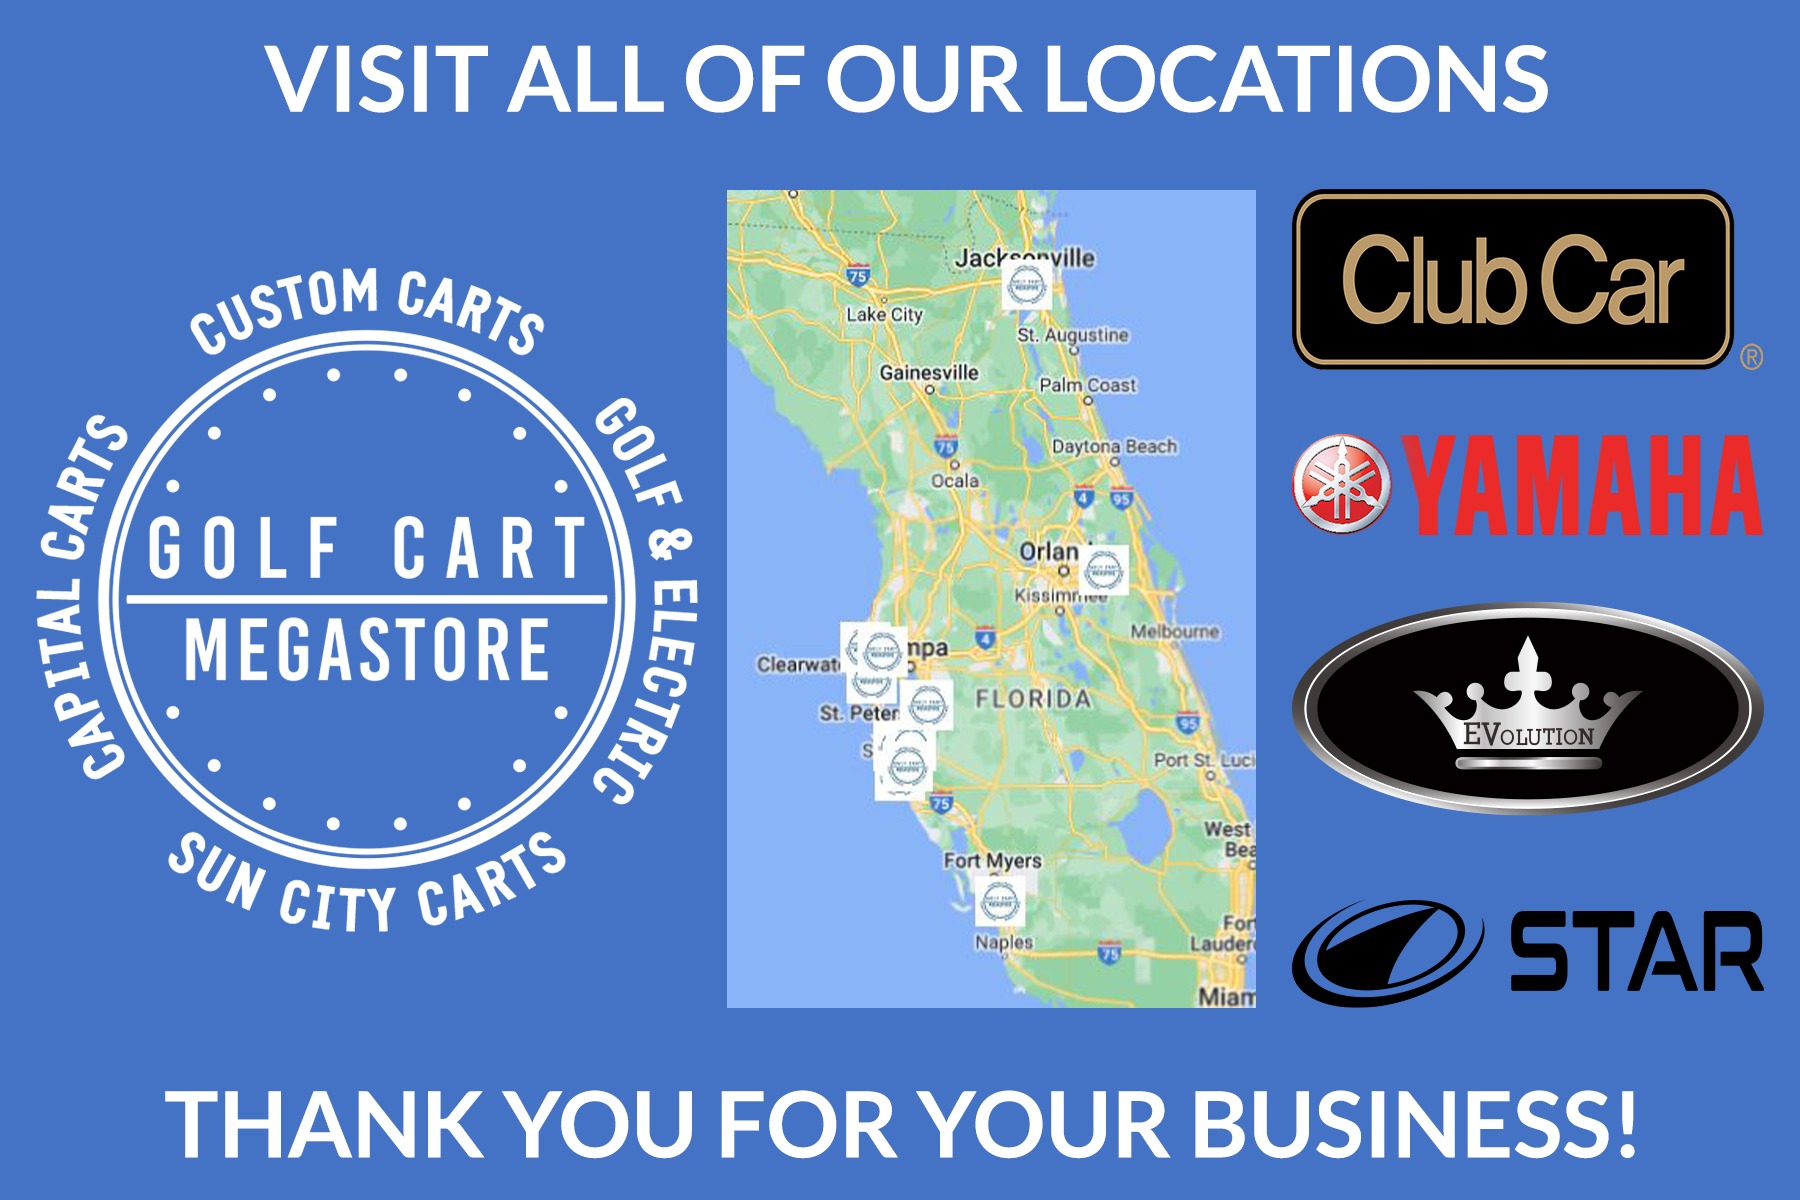 Visit all of our locations